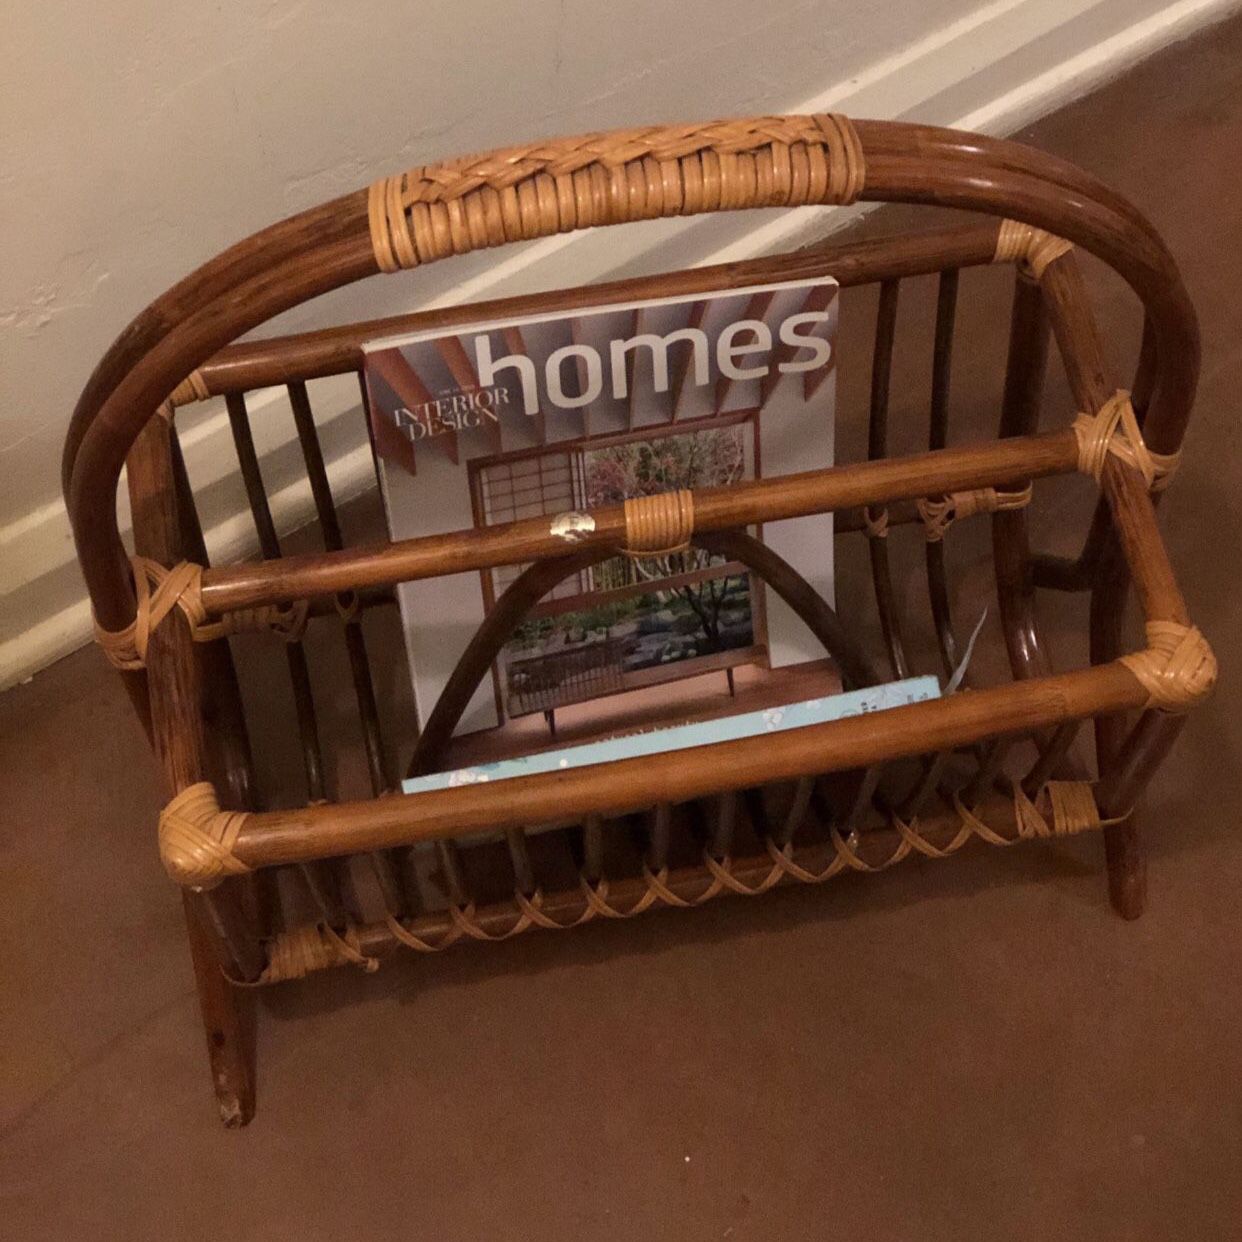 Vintage BOHO Rattan Wicker Bamboo Braided Retired Pier One Magazine/Book/Record Holder In GREAT Condition!